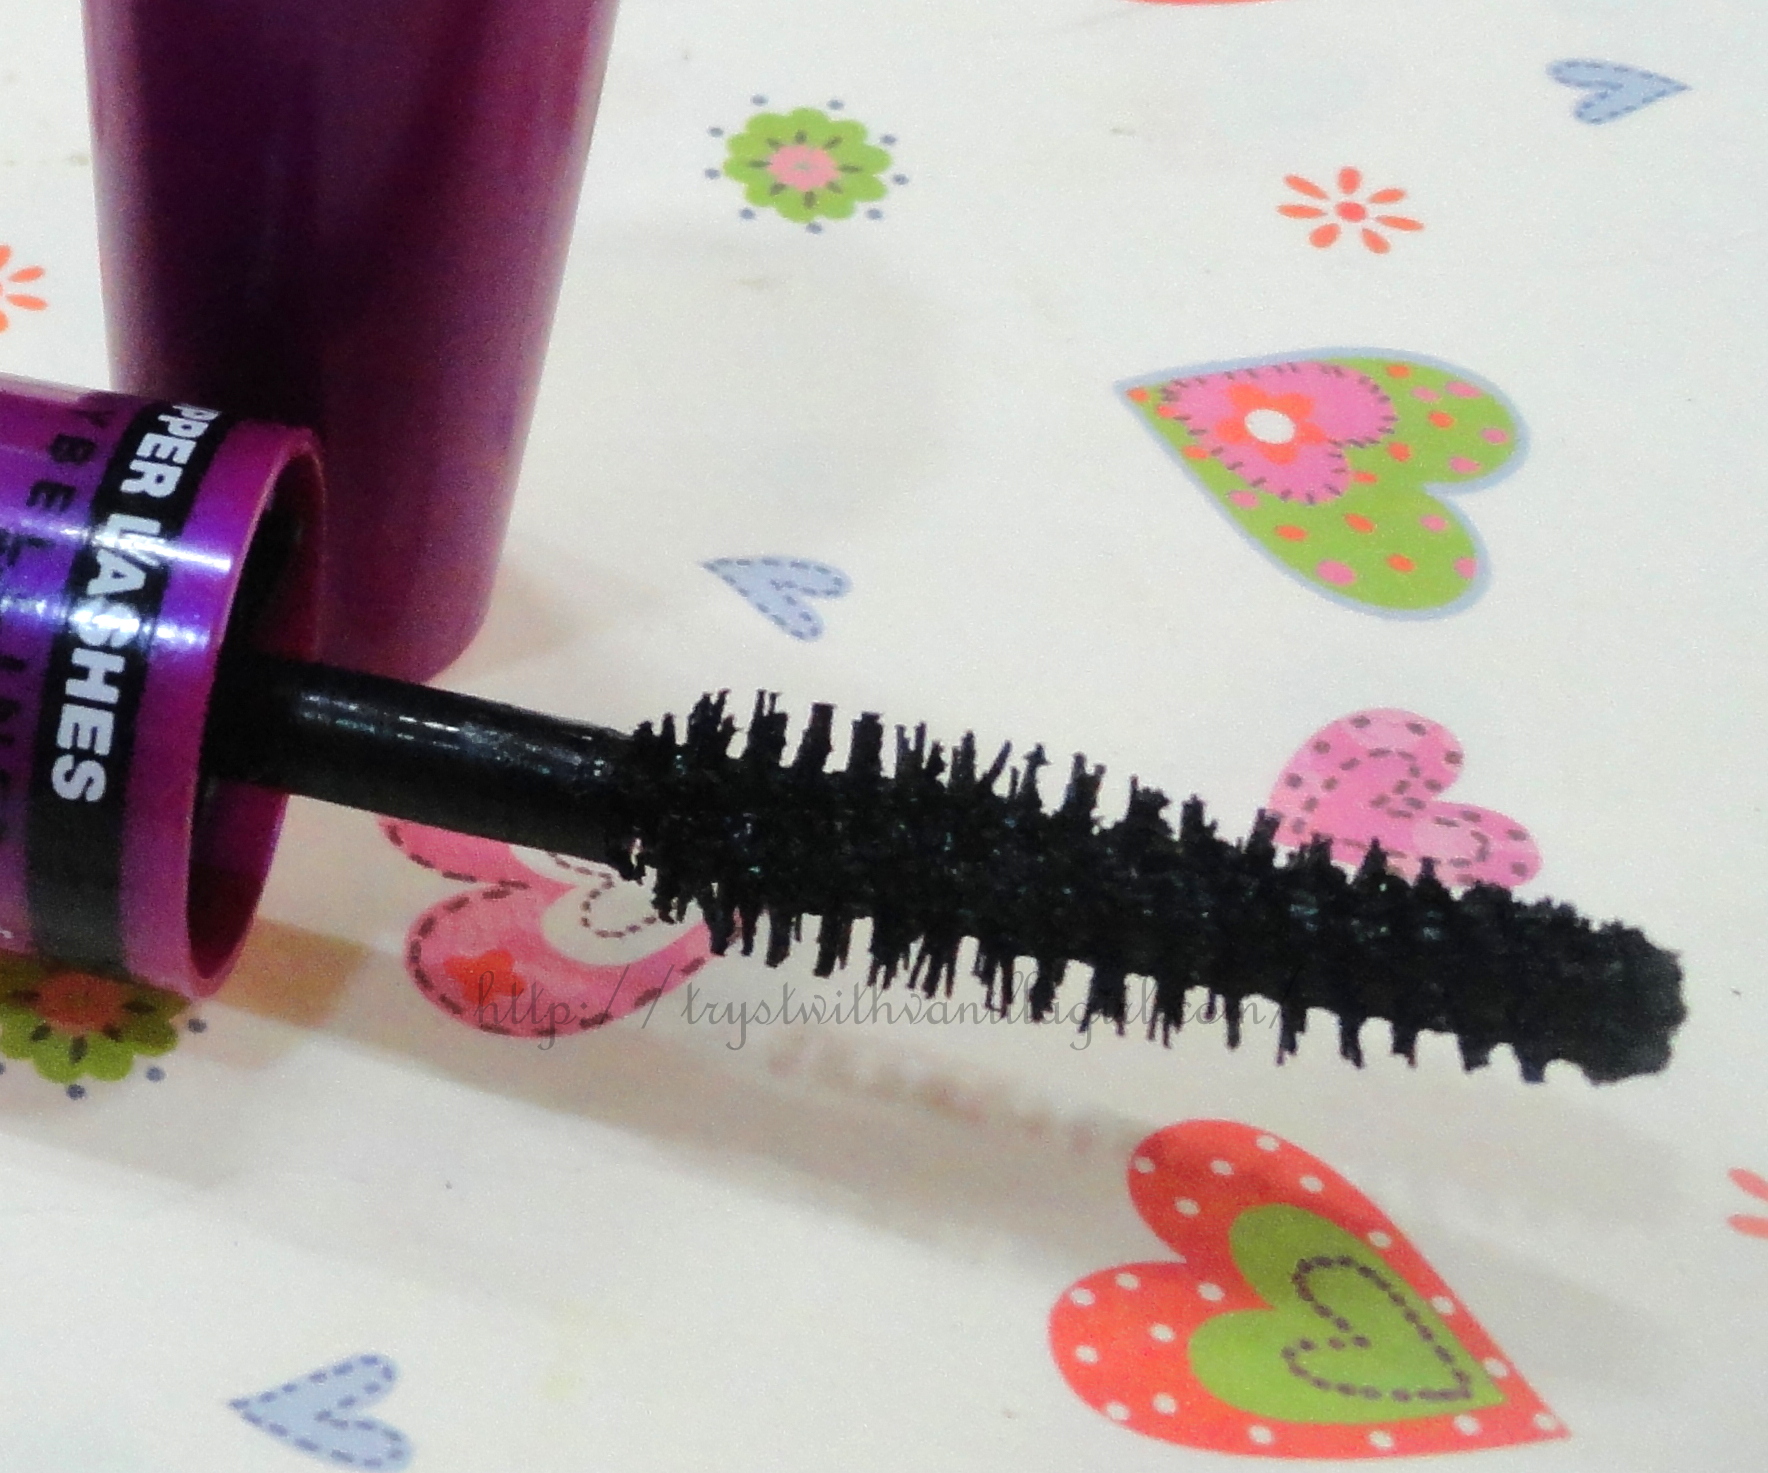 Maybelline The Falsies Big Eyes Mascara Review,Price in India